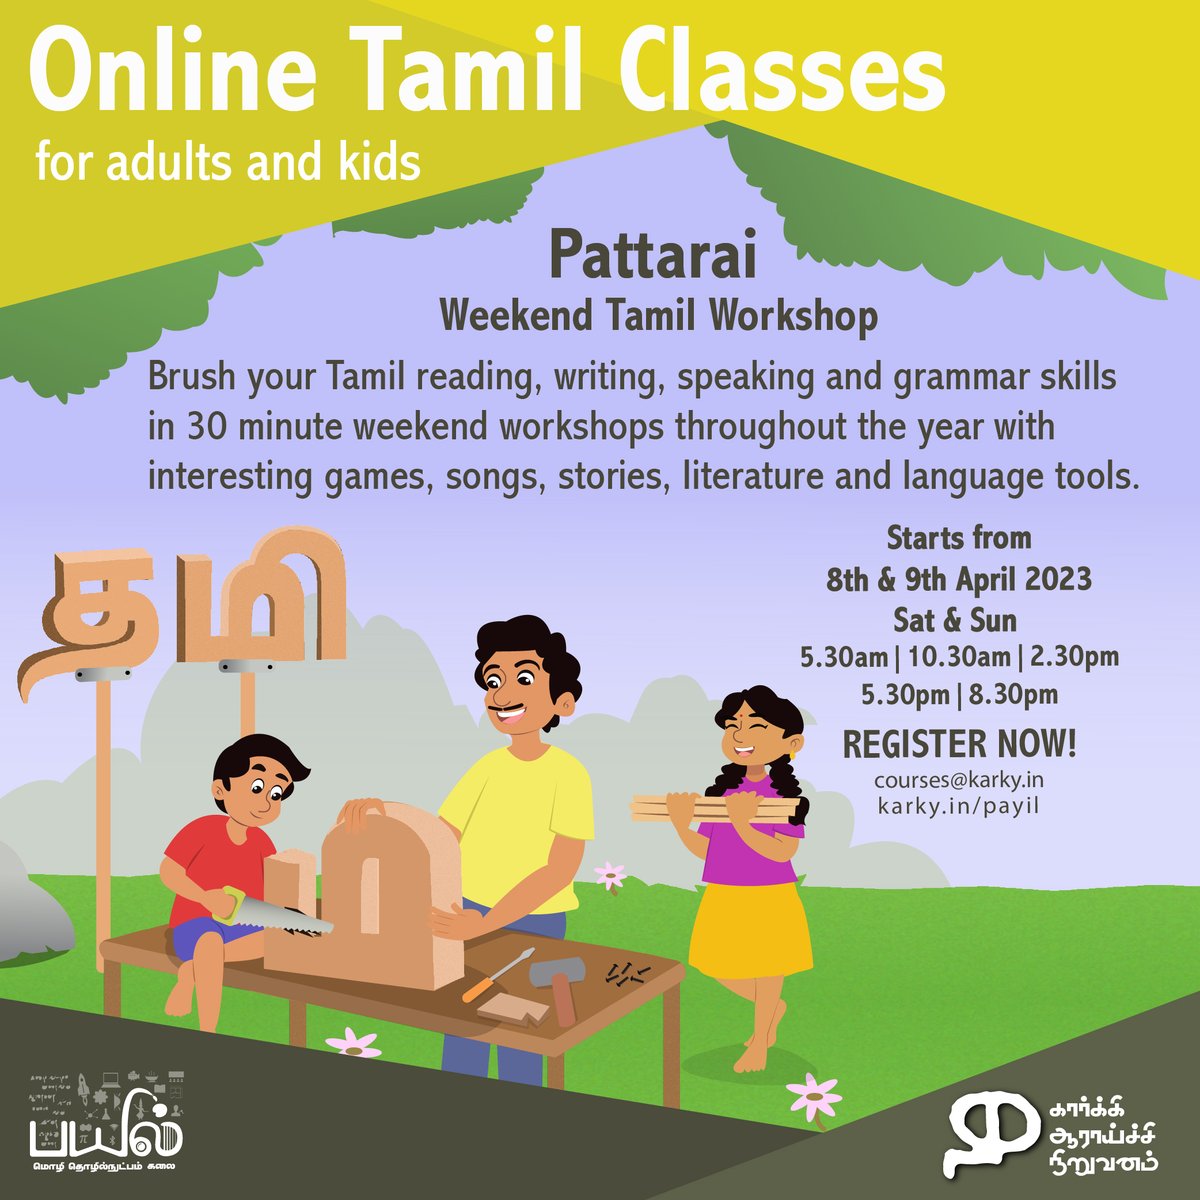 No more #Tamil language barriers!

Join our #pattarai workshop and boost your reading, writing, and speaking skills with live #weekendsessions.

Enroll now and become a fluent Tamil speaker!
karky.in/payil